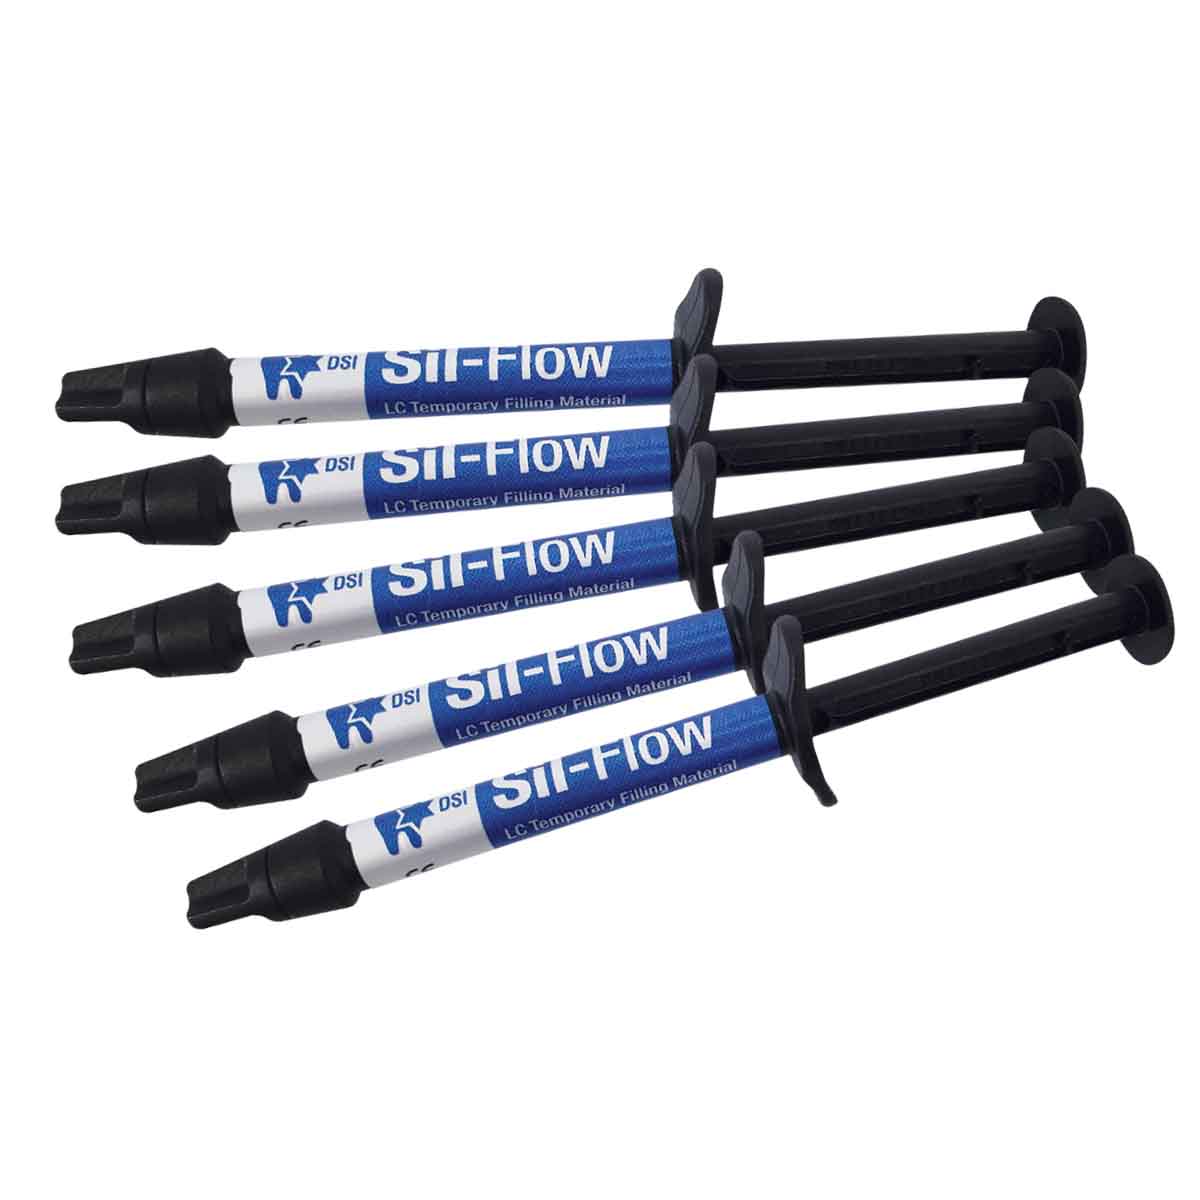 DSI Sil-Flow Light-cured Temporary Abutment Filling Material 2g x 5 Syringes